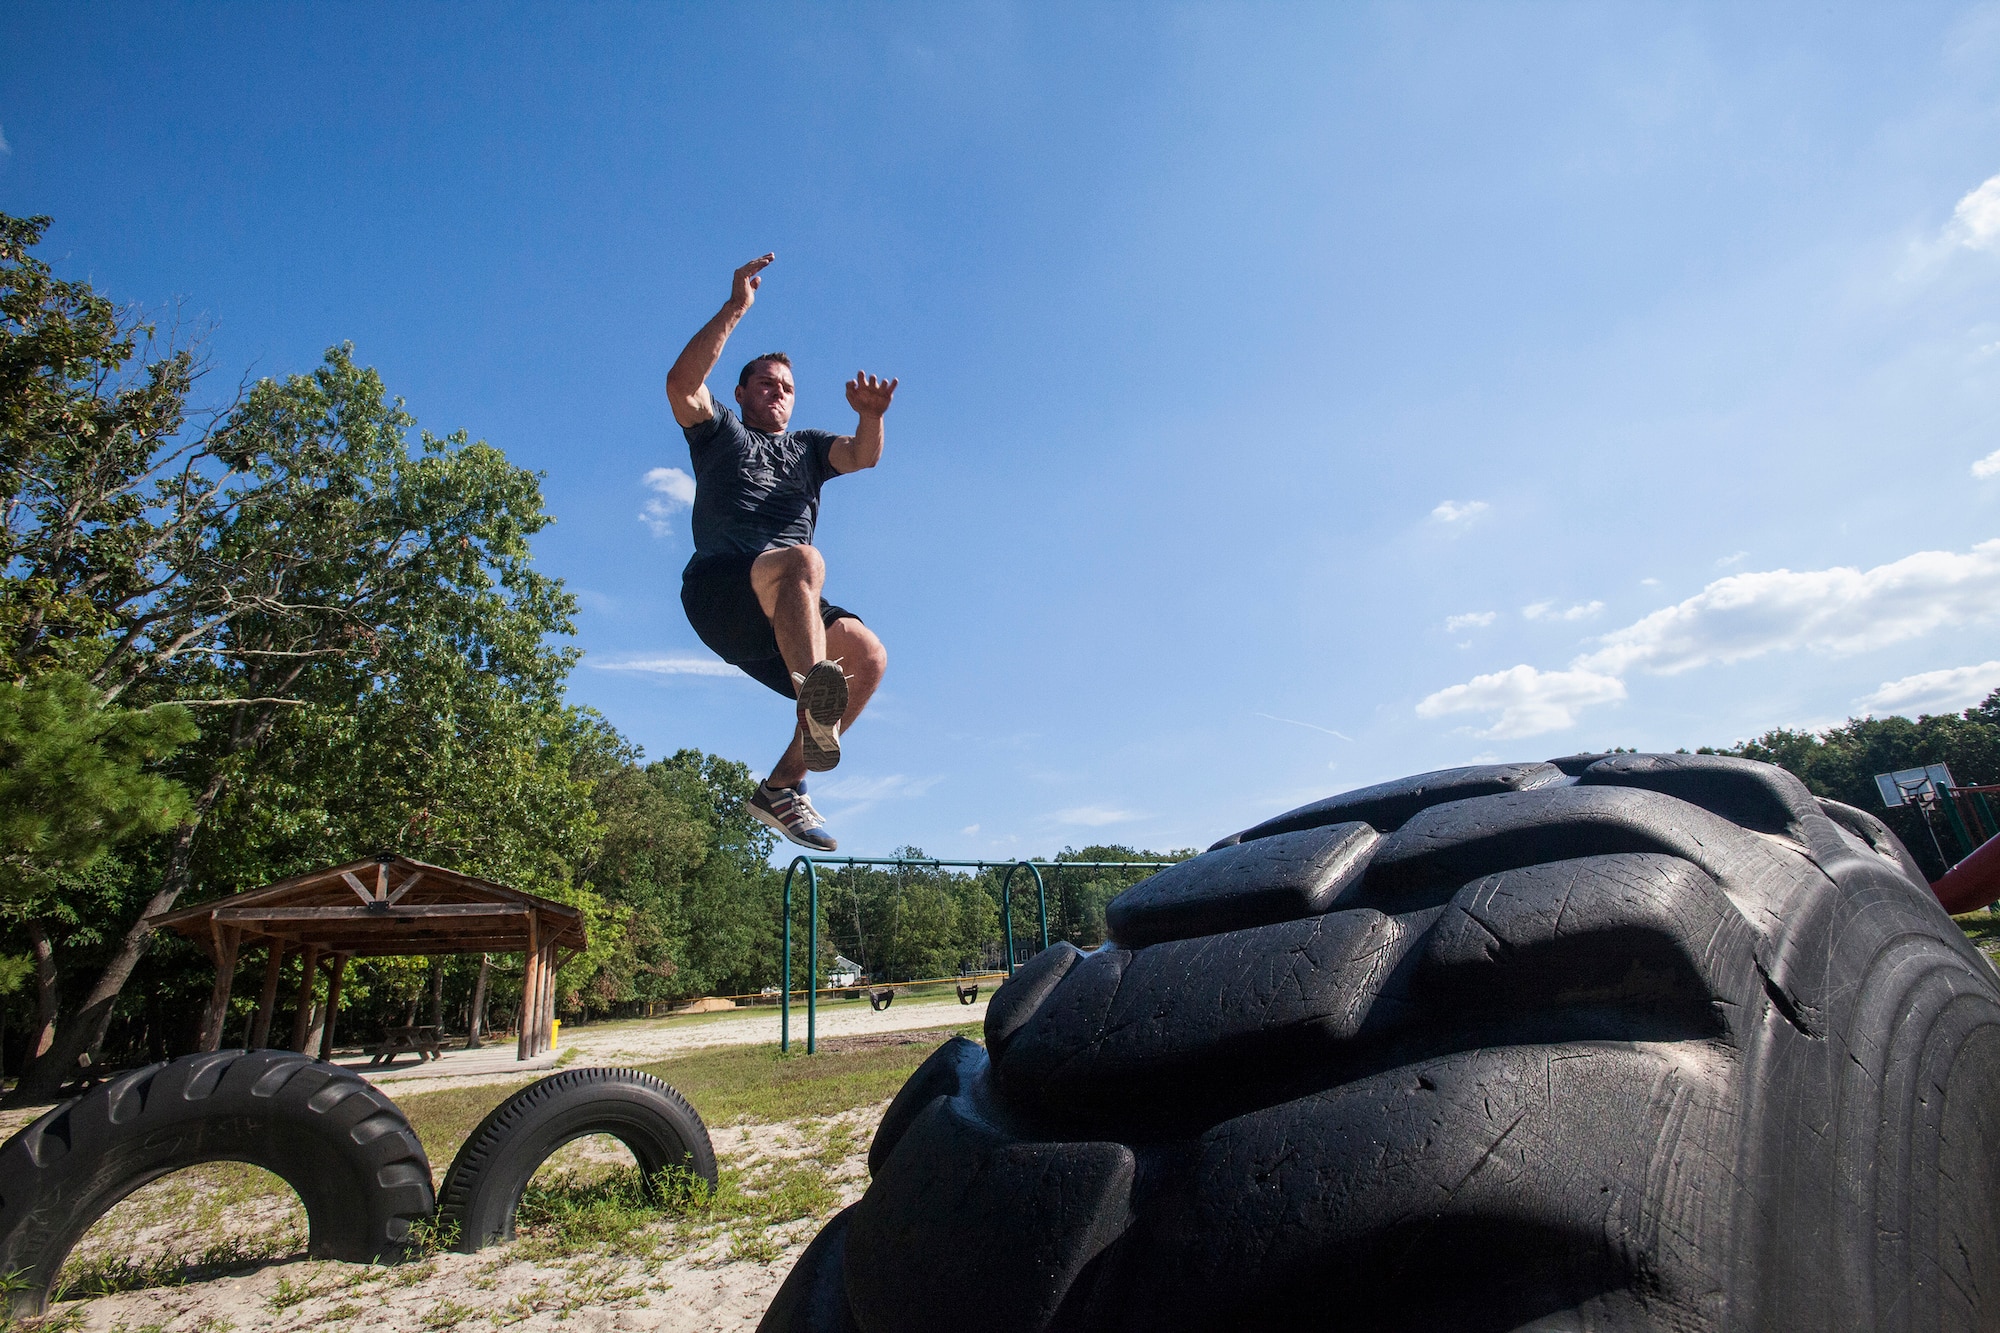 Tech. Sgt. Justin B. Gielski jumps from one tire to another while training to compete on the TV show “American Ninja Warrior” at a playground near his home in Medford, N.J., Aug. 21, 2015. Gielski placed fifth in the all-military city final on the TV show and advanced to the finals in Las Vegas. Gielski is a loadmaster with the 150th Special Operations Squadron, 108th Wing, New Jersey Air National Guard, located at Joint Base McGuire-Dix-Lakehurst, N.J. (U.S. Air National Guard photo by Master Sgt. Mark C. Olsen/Released)